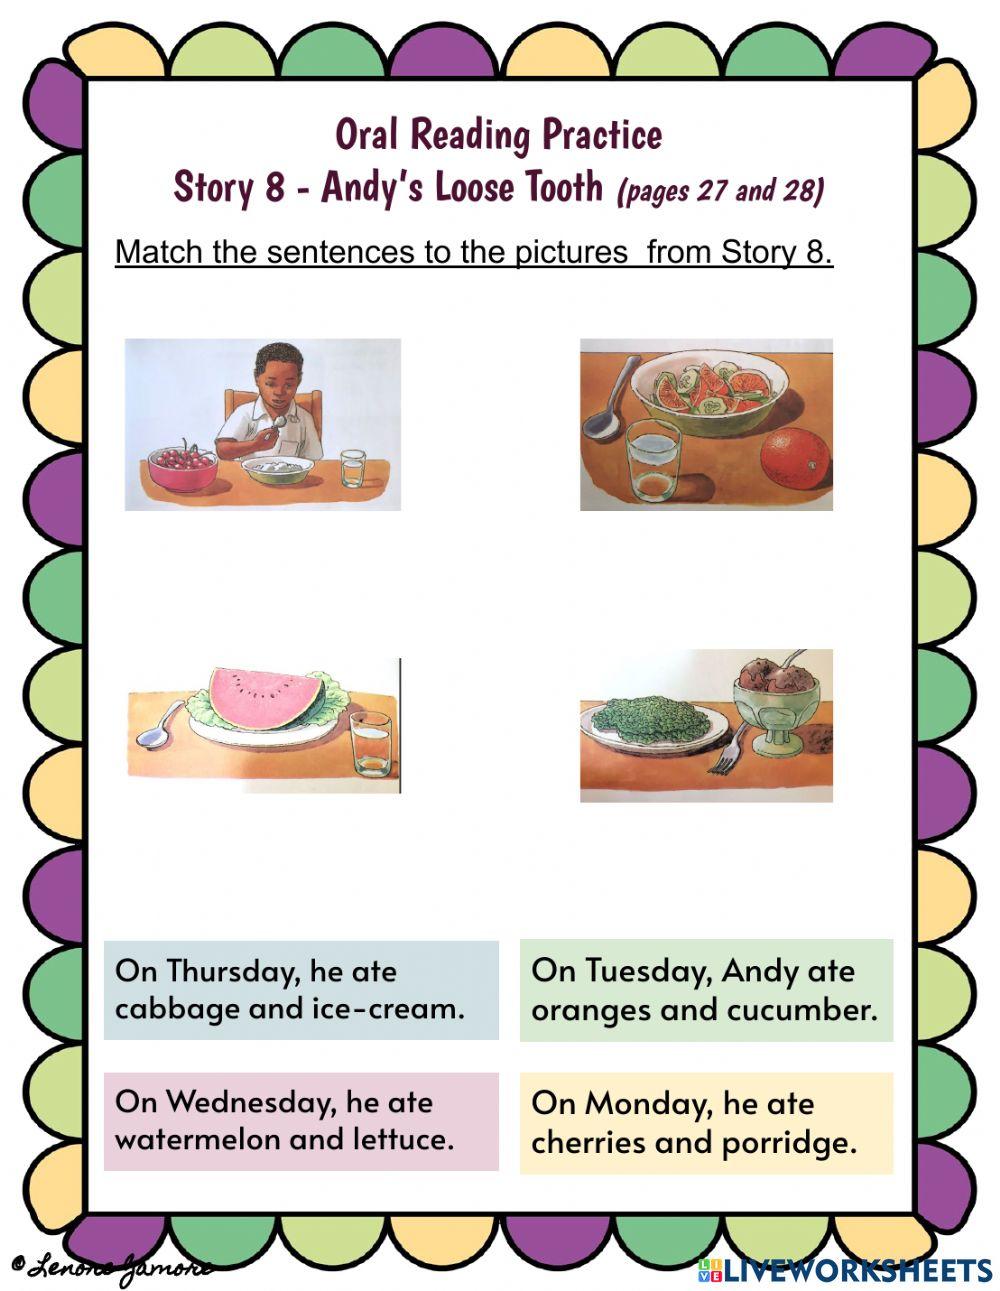 Oral Reading Practice - Story 8, pages 27 and 28